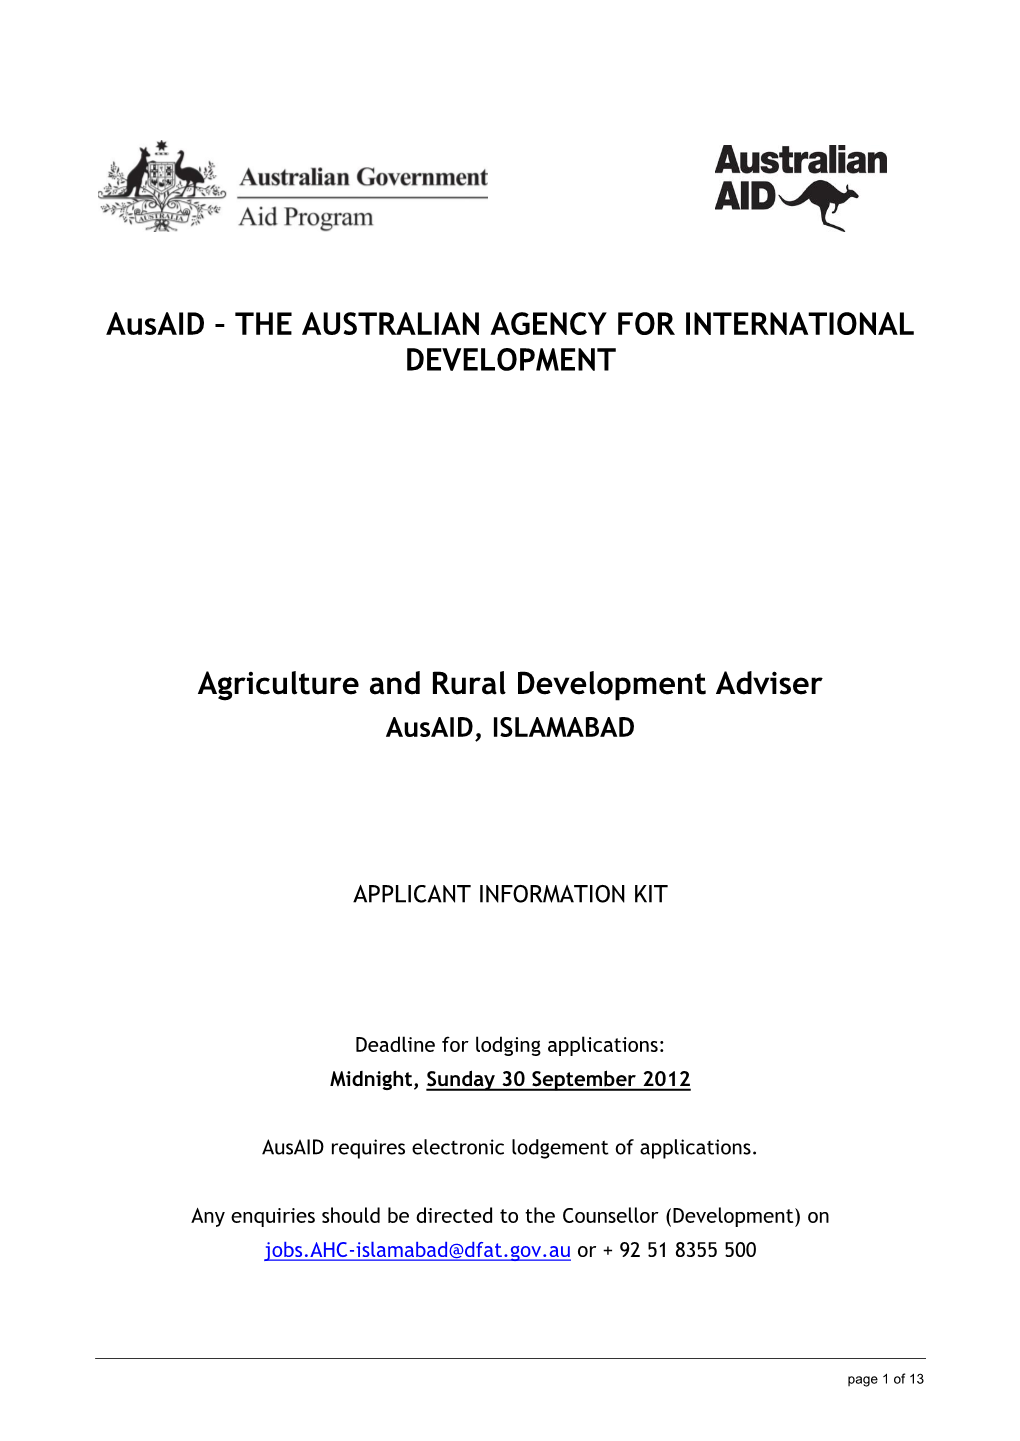 Agriculture and Rural Development Adviser Ausaid, ISLAMABAD